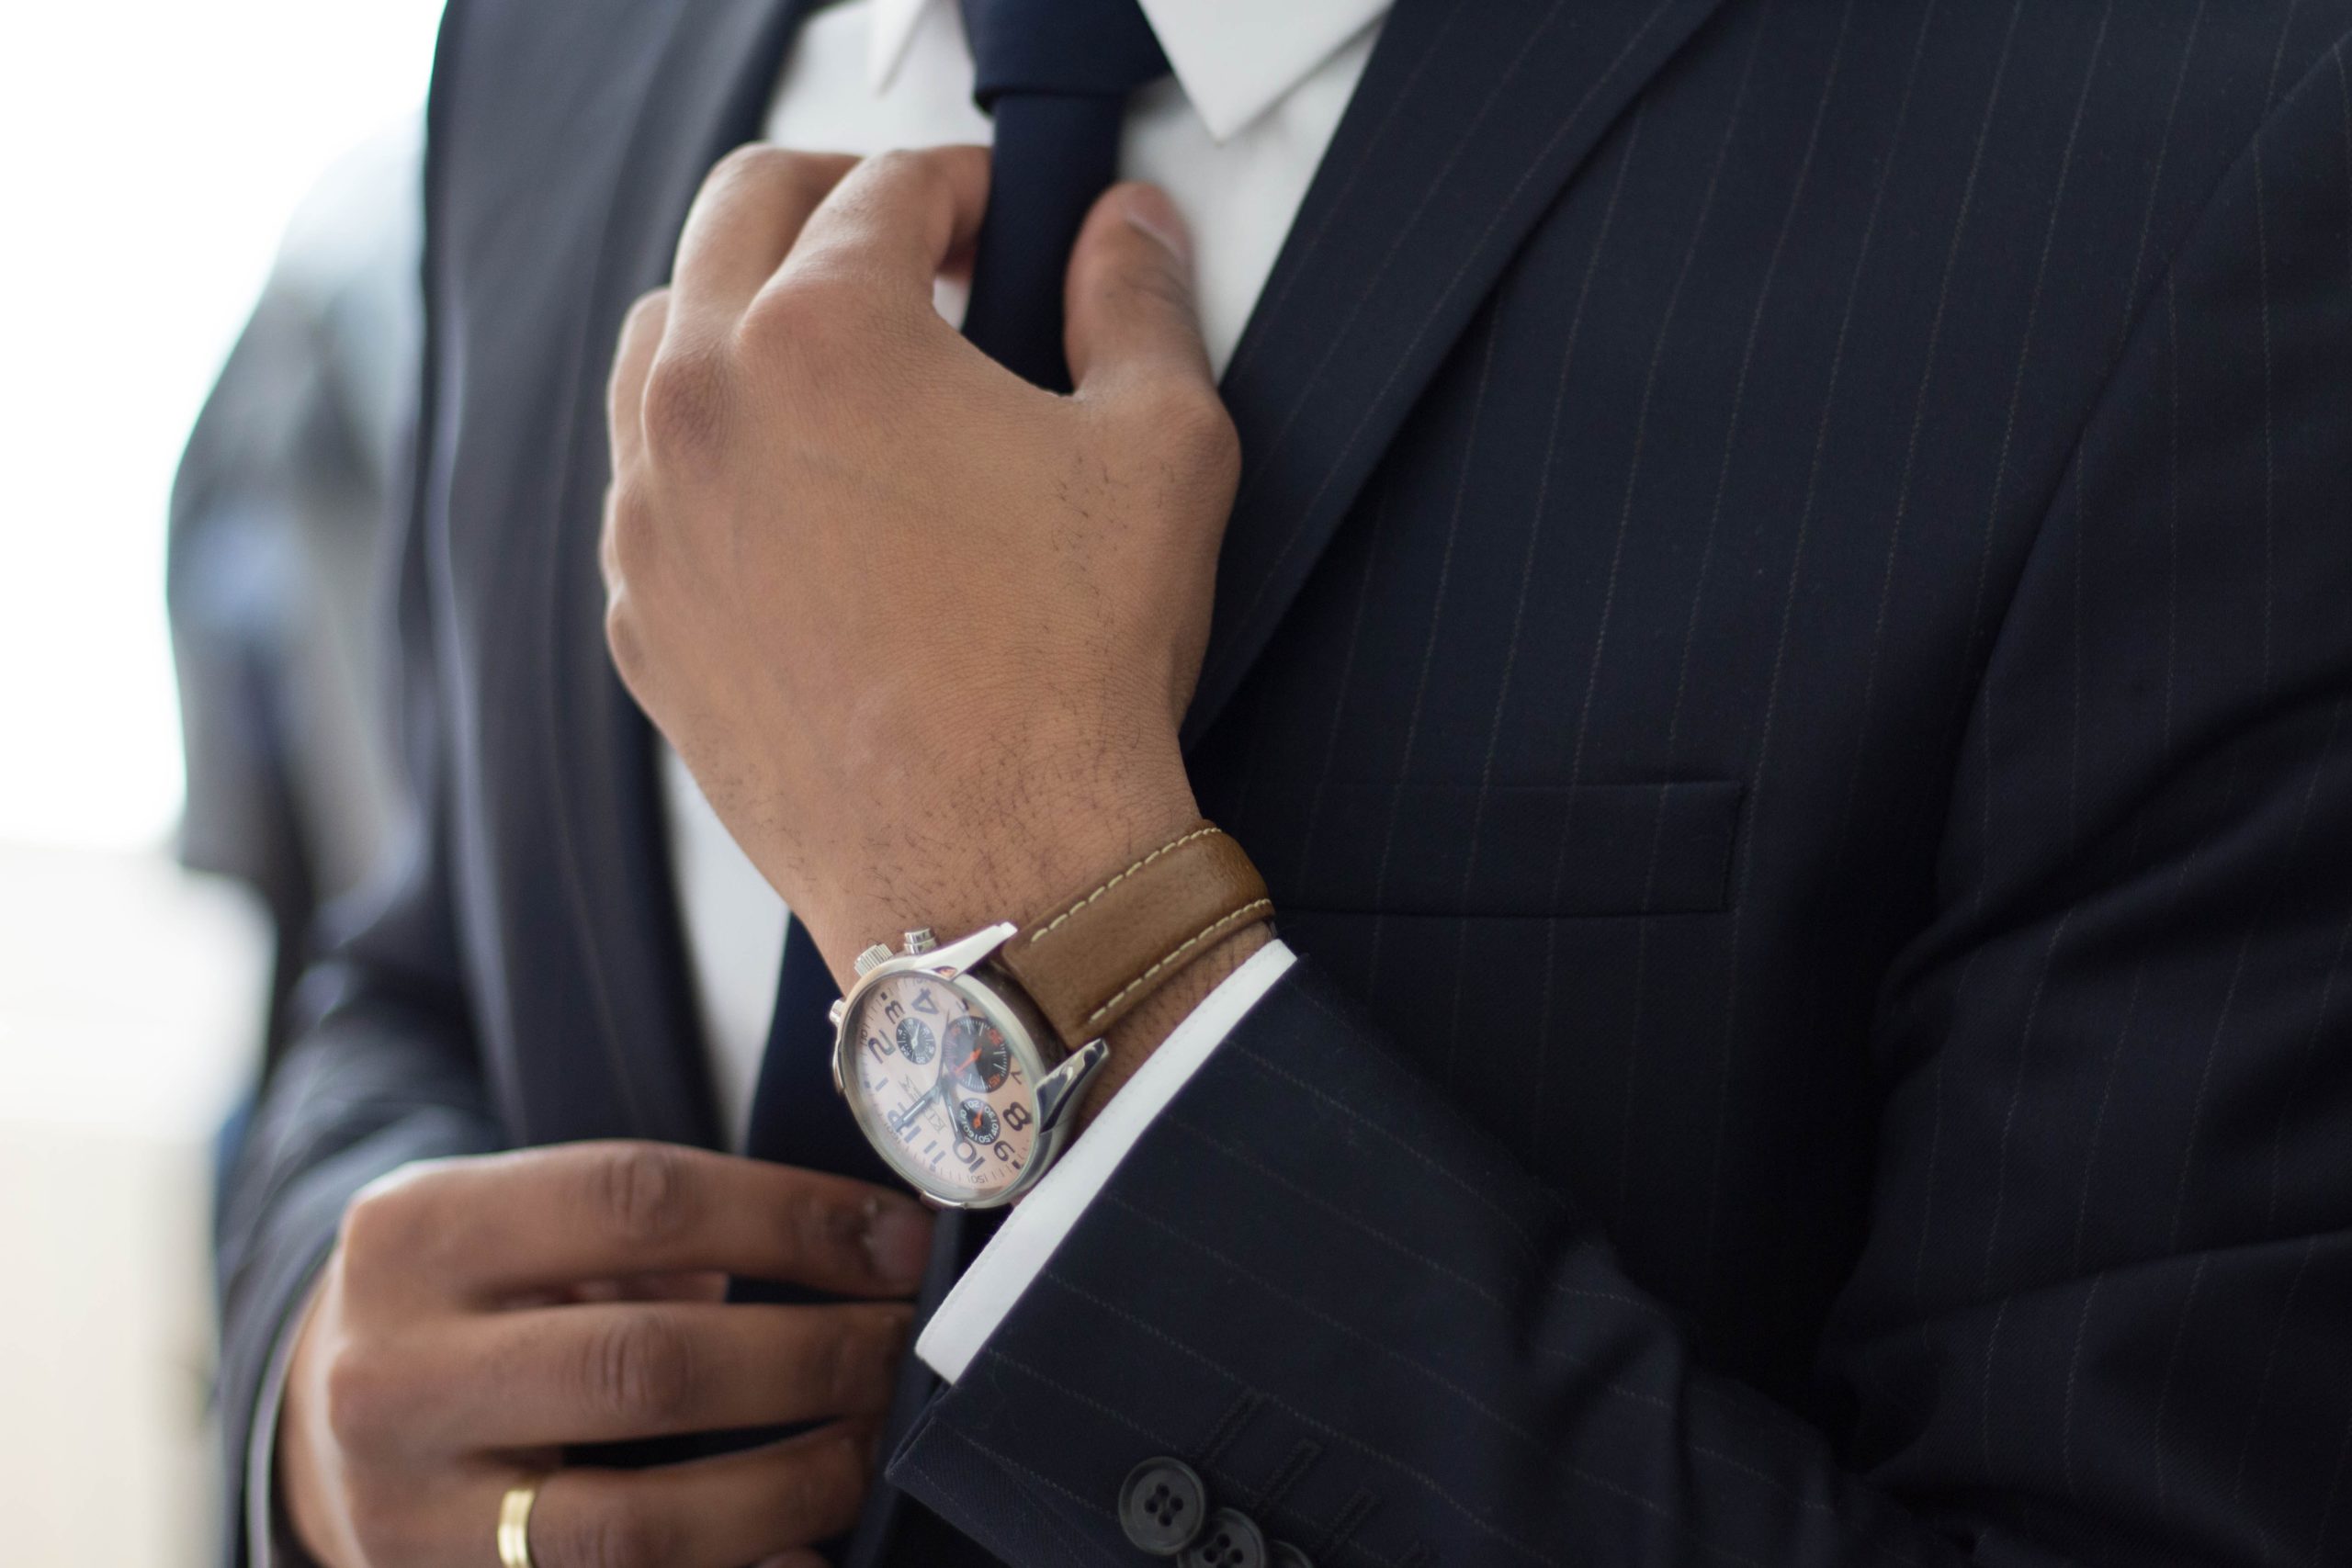 Men's fashionable suit and watch